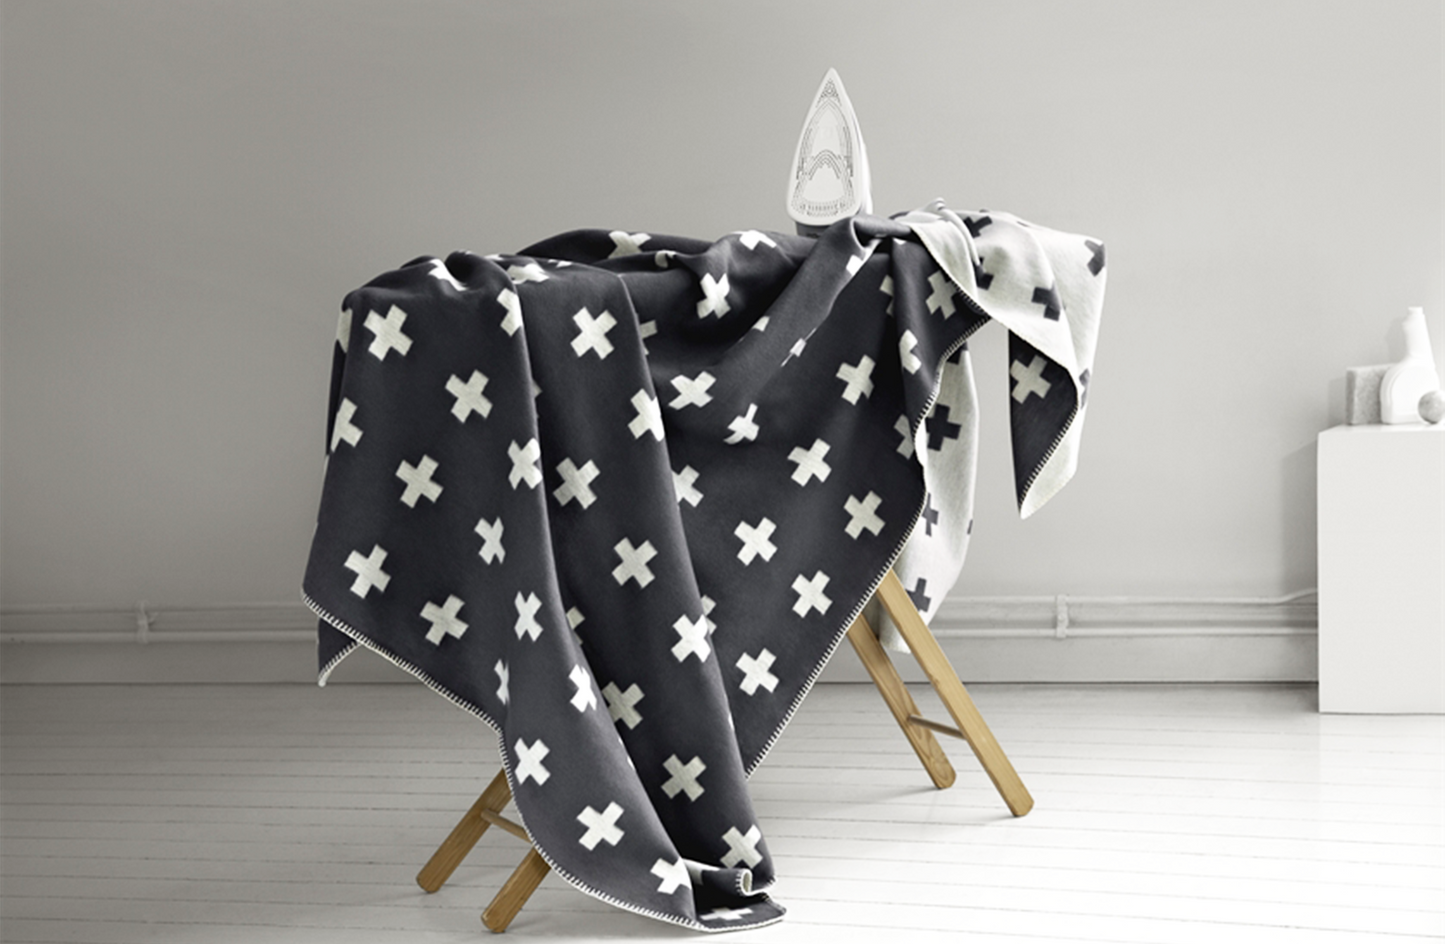 
                  
                    A grey blanket with white crosses on it draped over an ironing board
                  
                